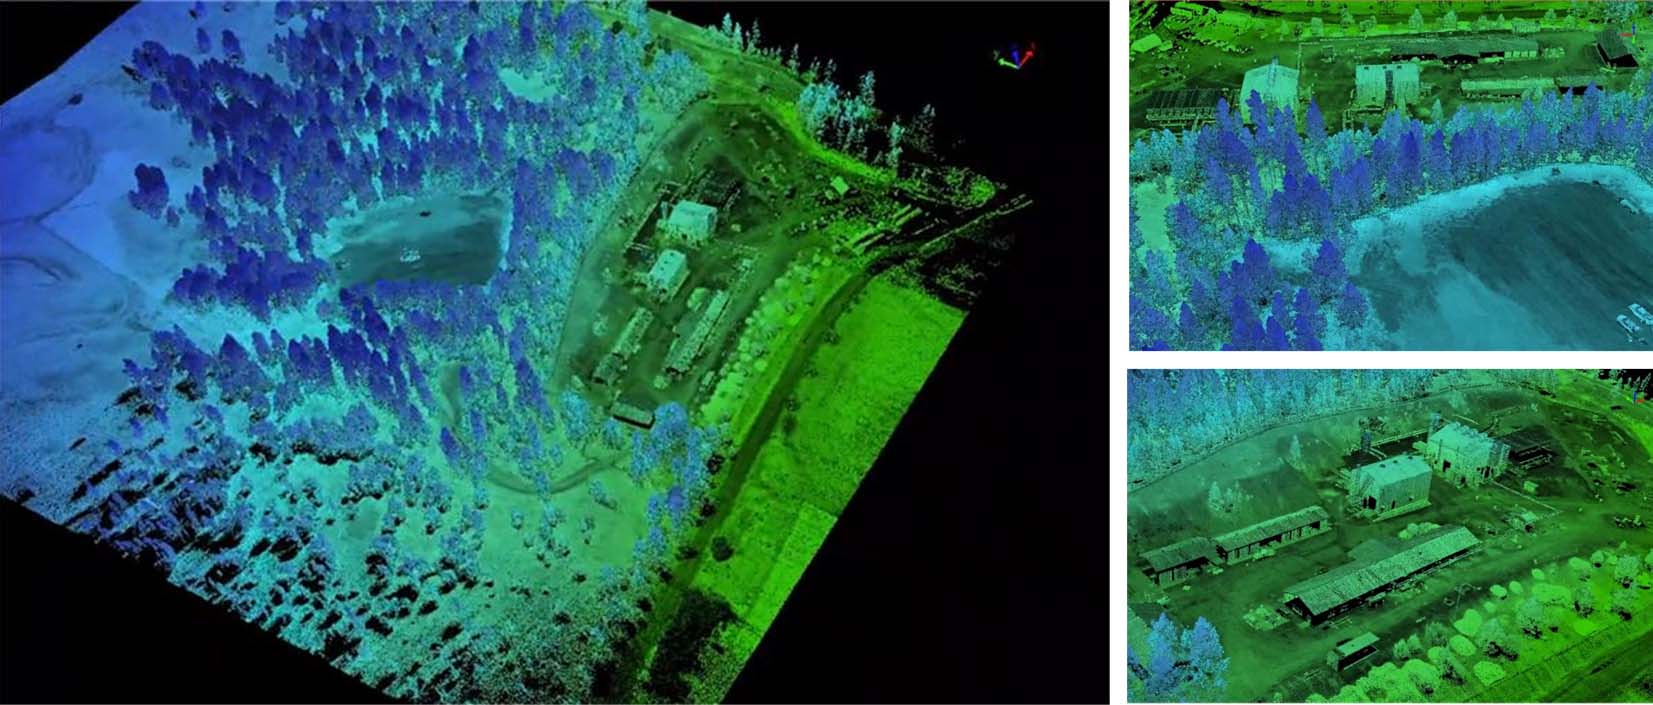 Millions of dots notate where the drone would have encountered leaves, trees or other brush